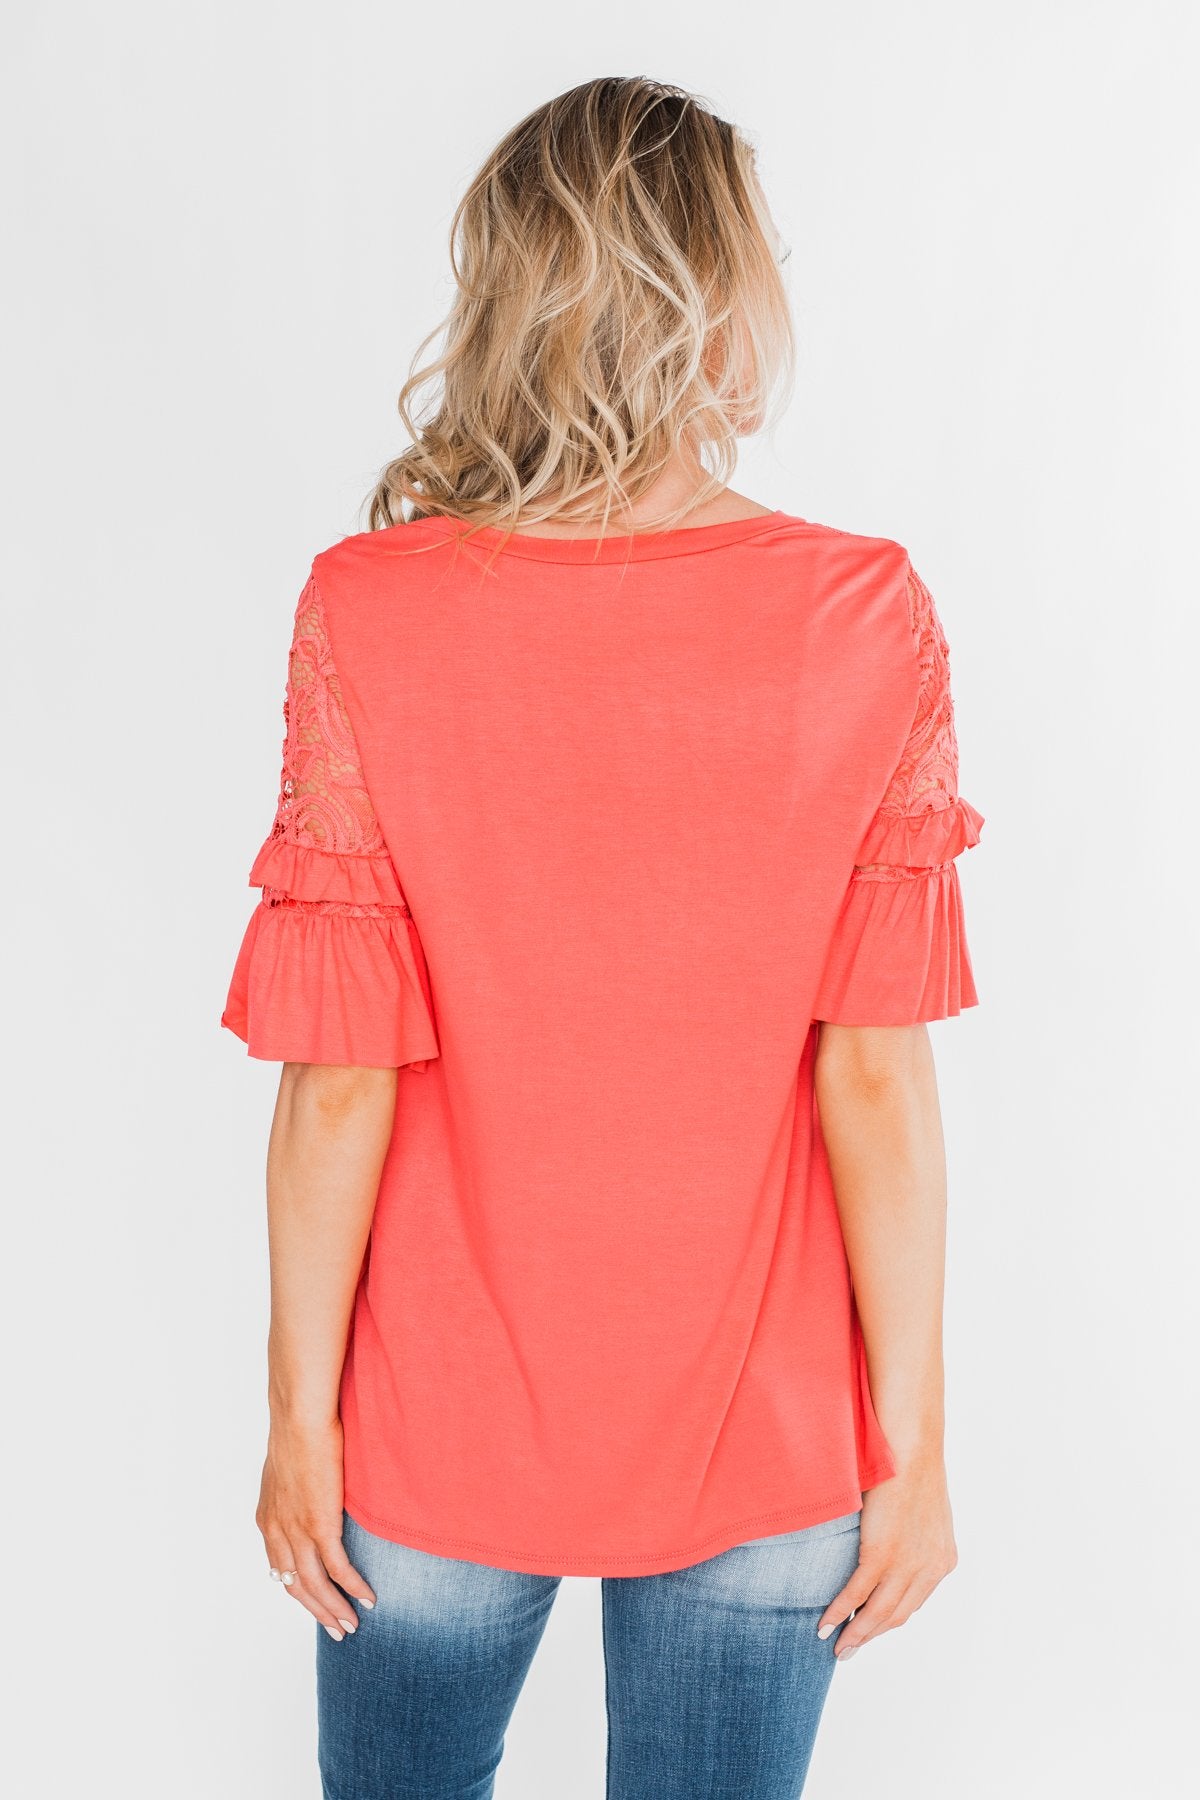 Part Of You Half Bell Sleeve Top- Coral